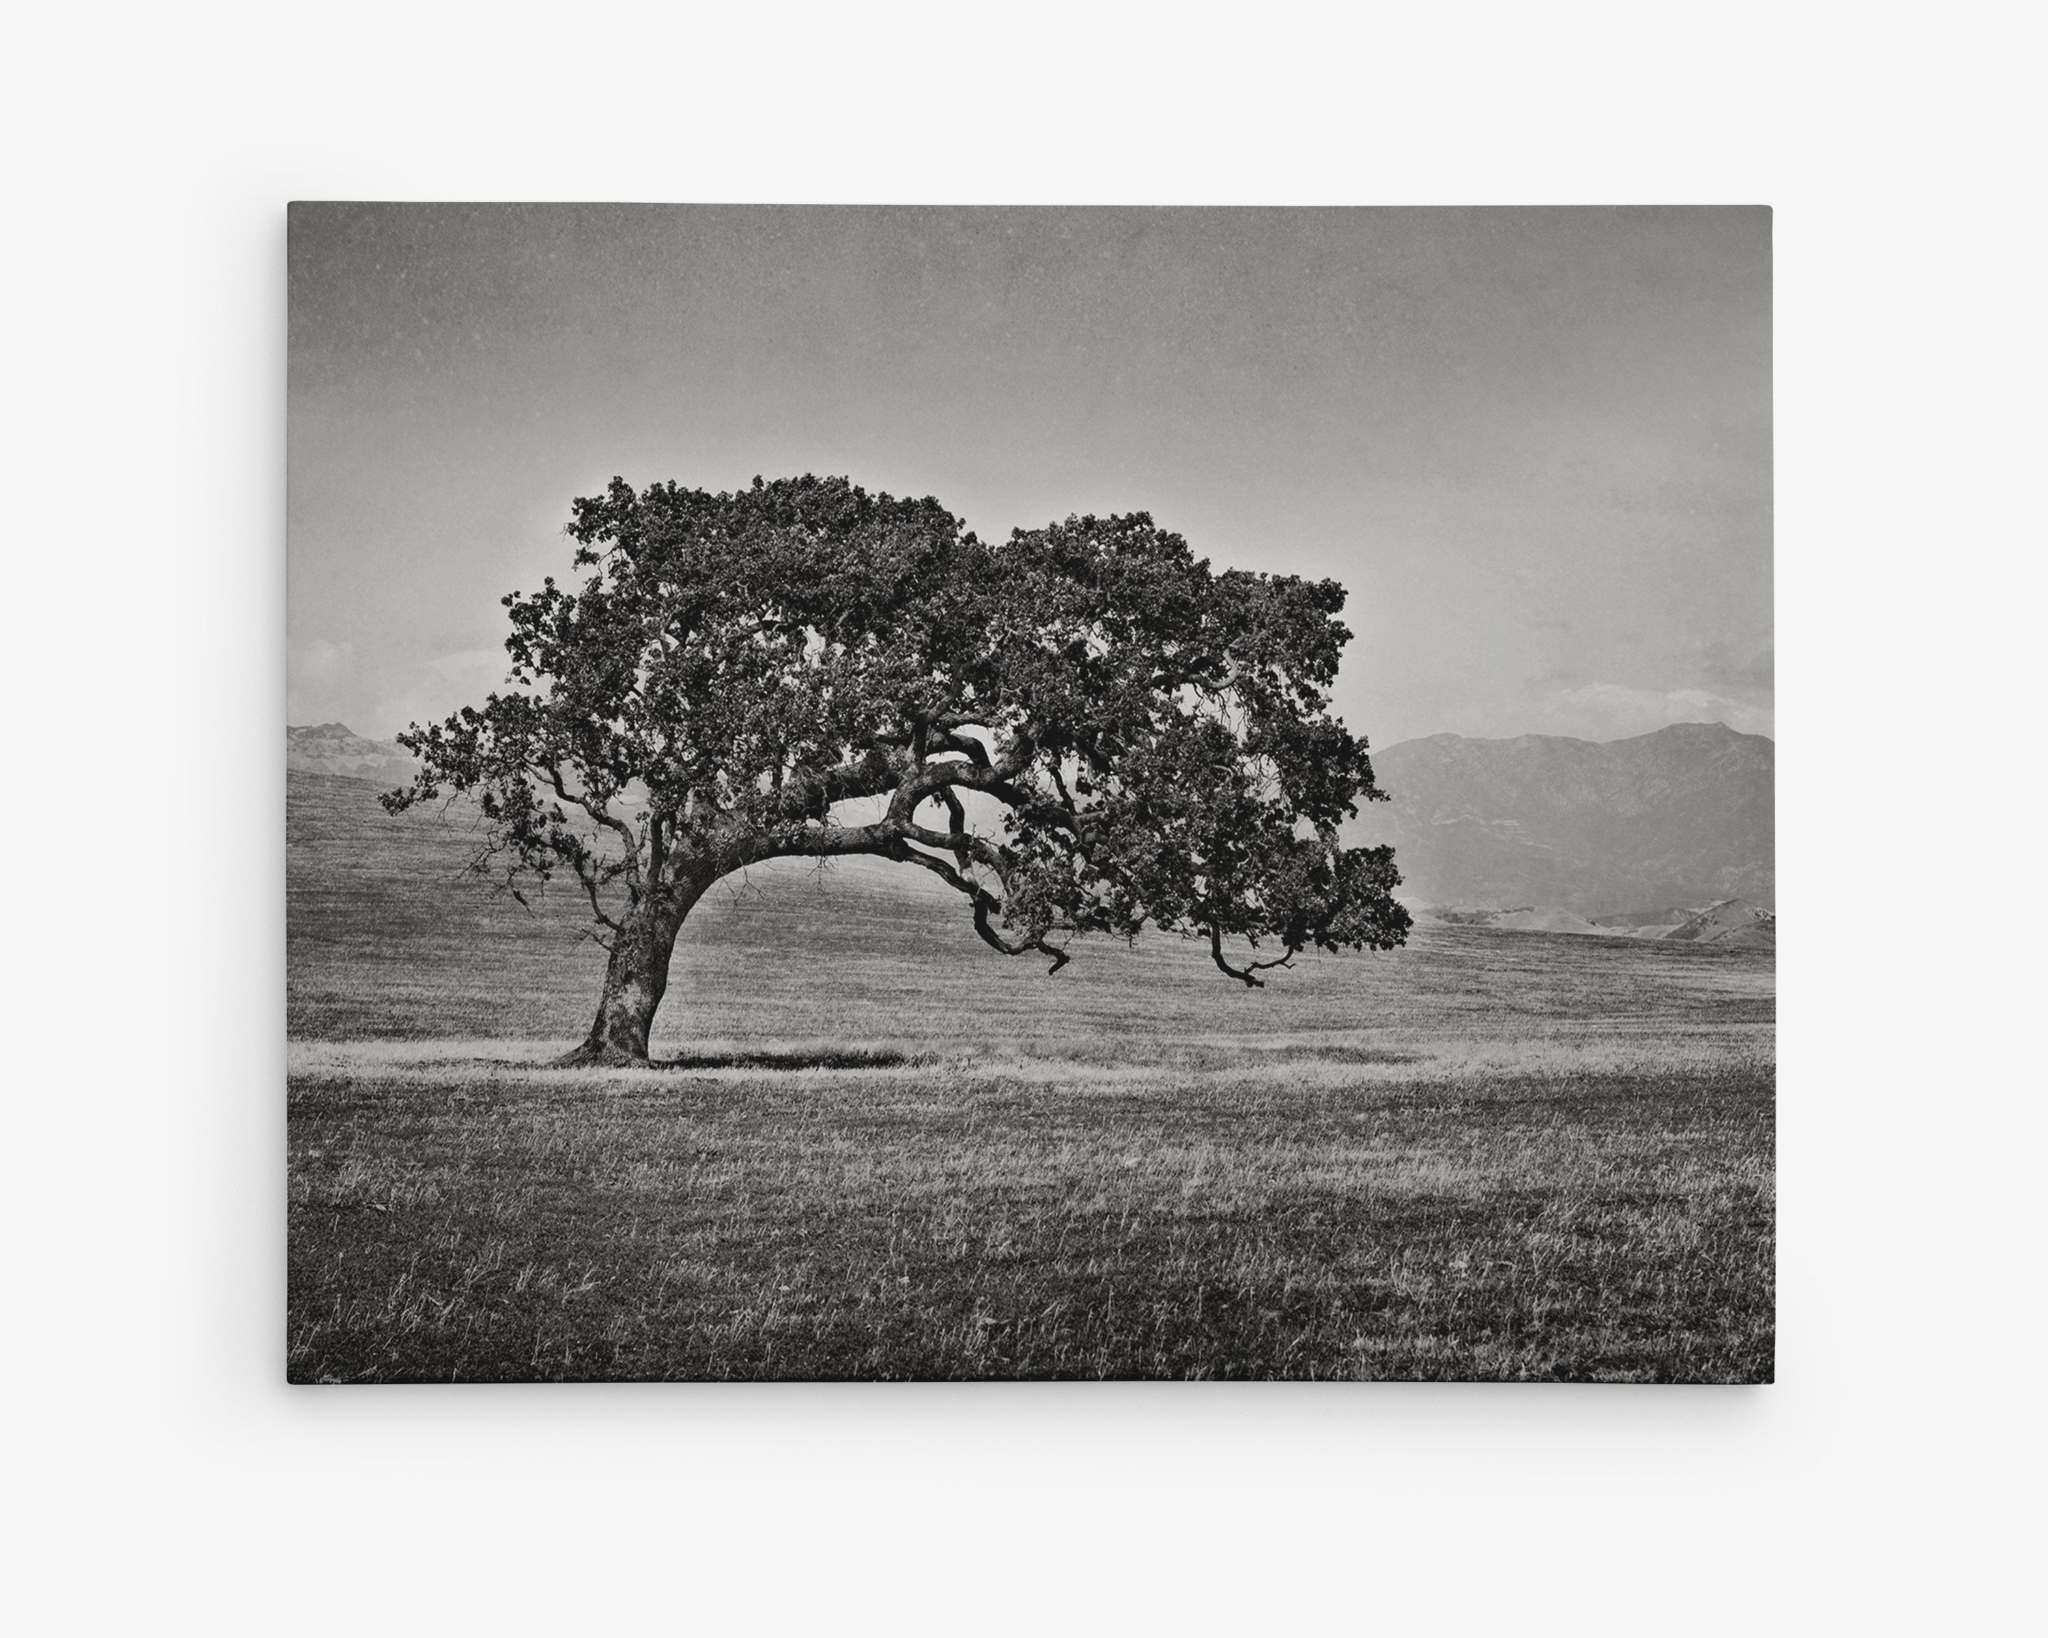 A black-and-white photograph of a solitary California Oak standing in an open field, with rolling hills and mountains in the background. The sky above is overcast, giving the image a moody and serene atmosphere. This Offley Green Californian Oak Tree Landscape Canvas, 'Windswept (Black and White)' gallery wrap is ready-to-hang, perfect for adding a touch of nature to any space.